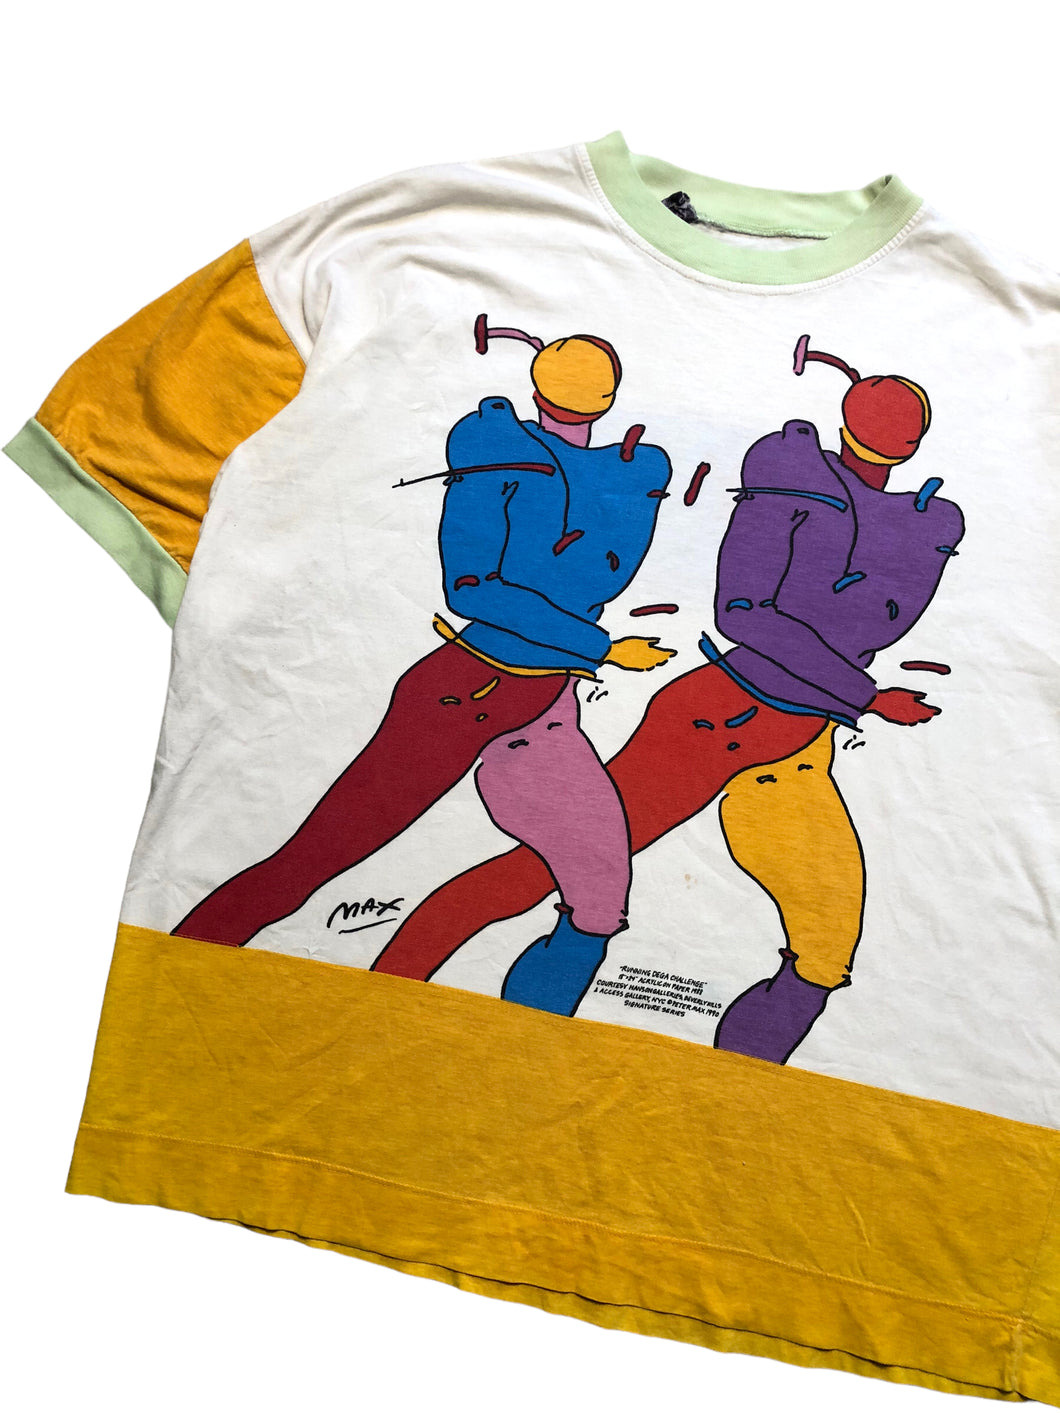 NeoMax by Peter Max “Running Dega Challenge” (1988) Cut and Sew Tee